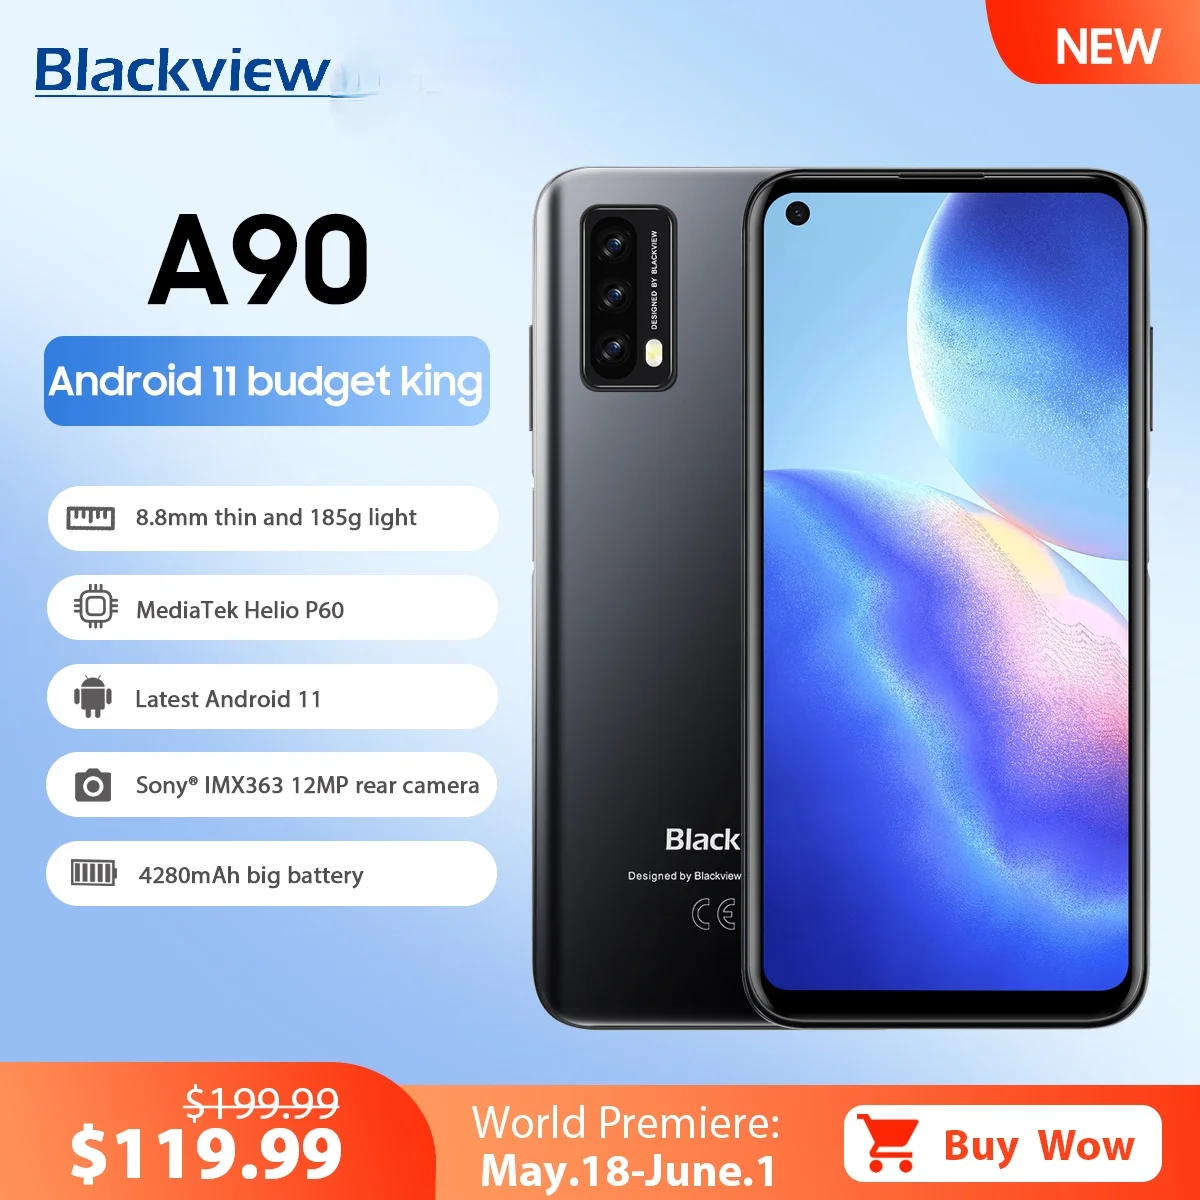 

Original New Blackview A90 4GB 64GB Android 11 Smartphone Helio P60 Octa Core 12MP HDR 4280mAh Cellphone 4G LTE 6.39'' Telephone